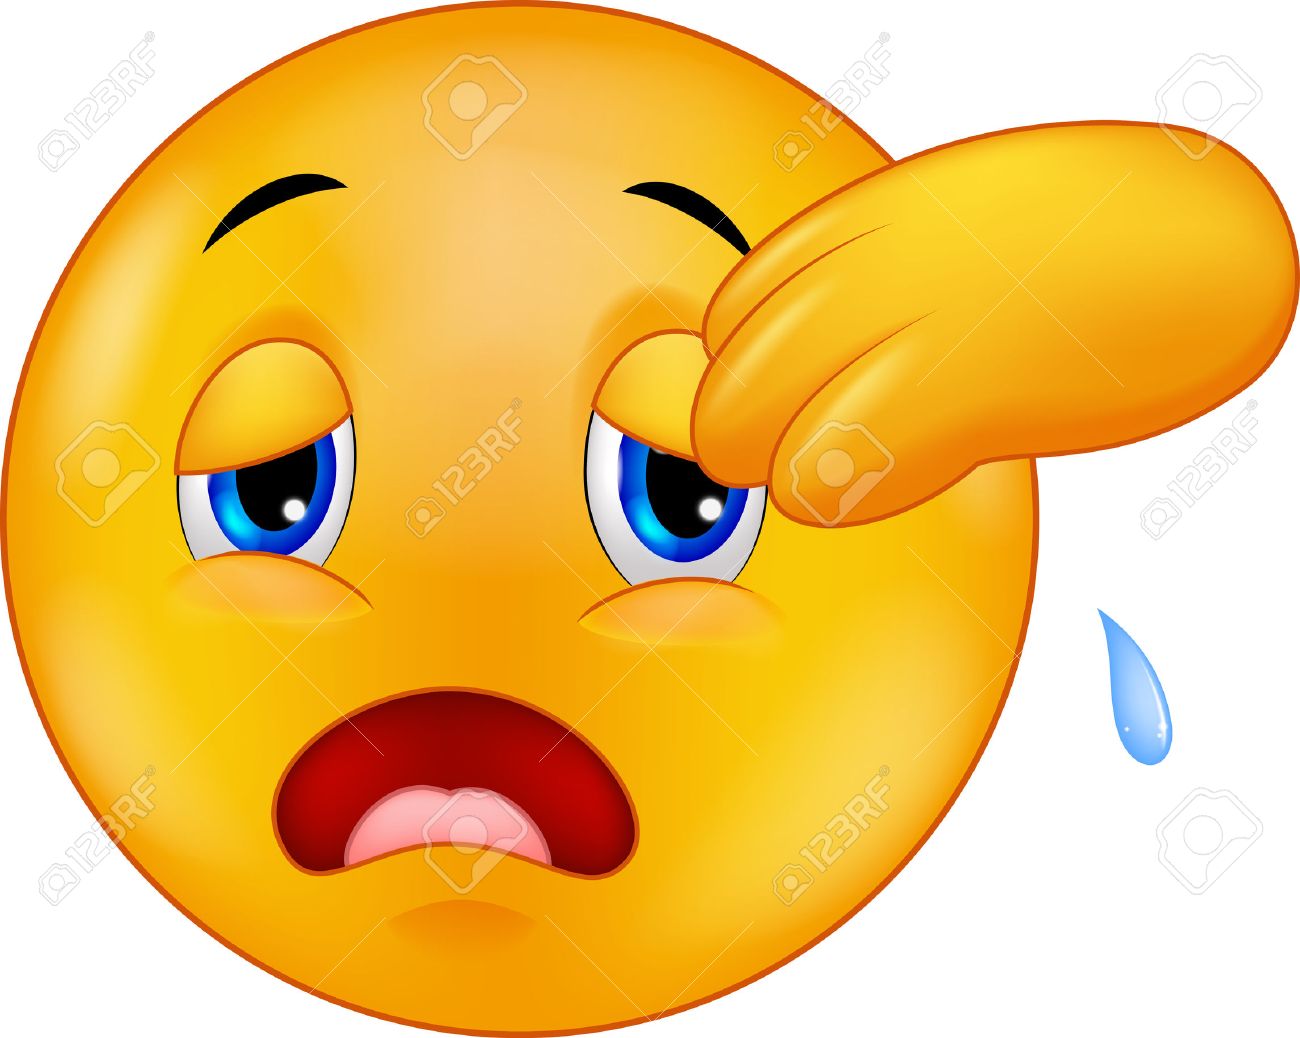 Tired Cartoon Face Free Download Clip Art.